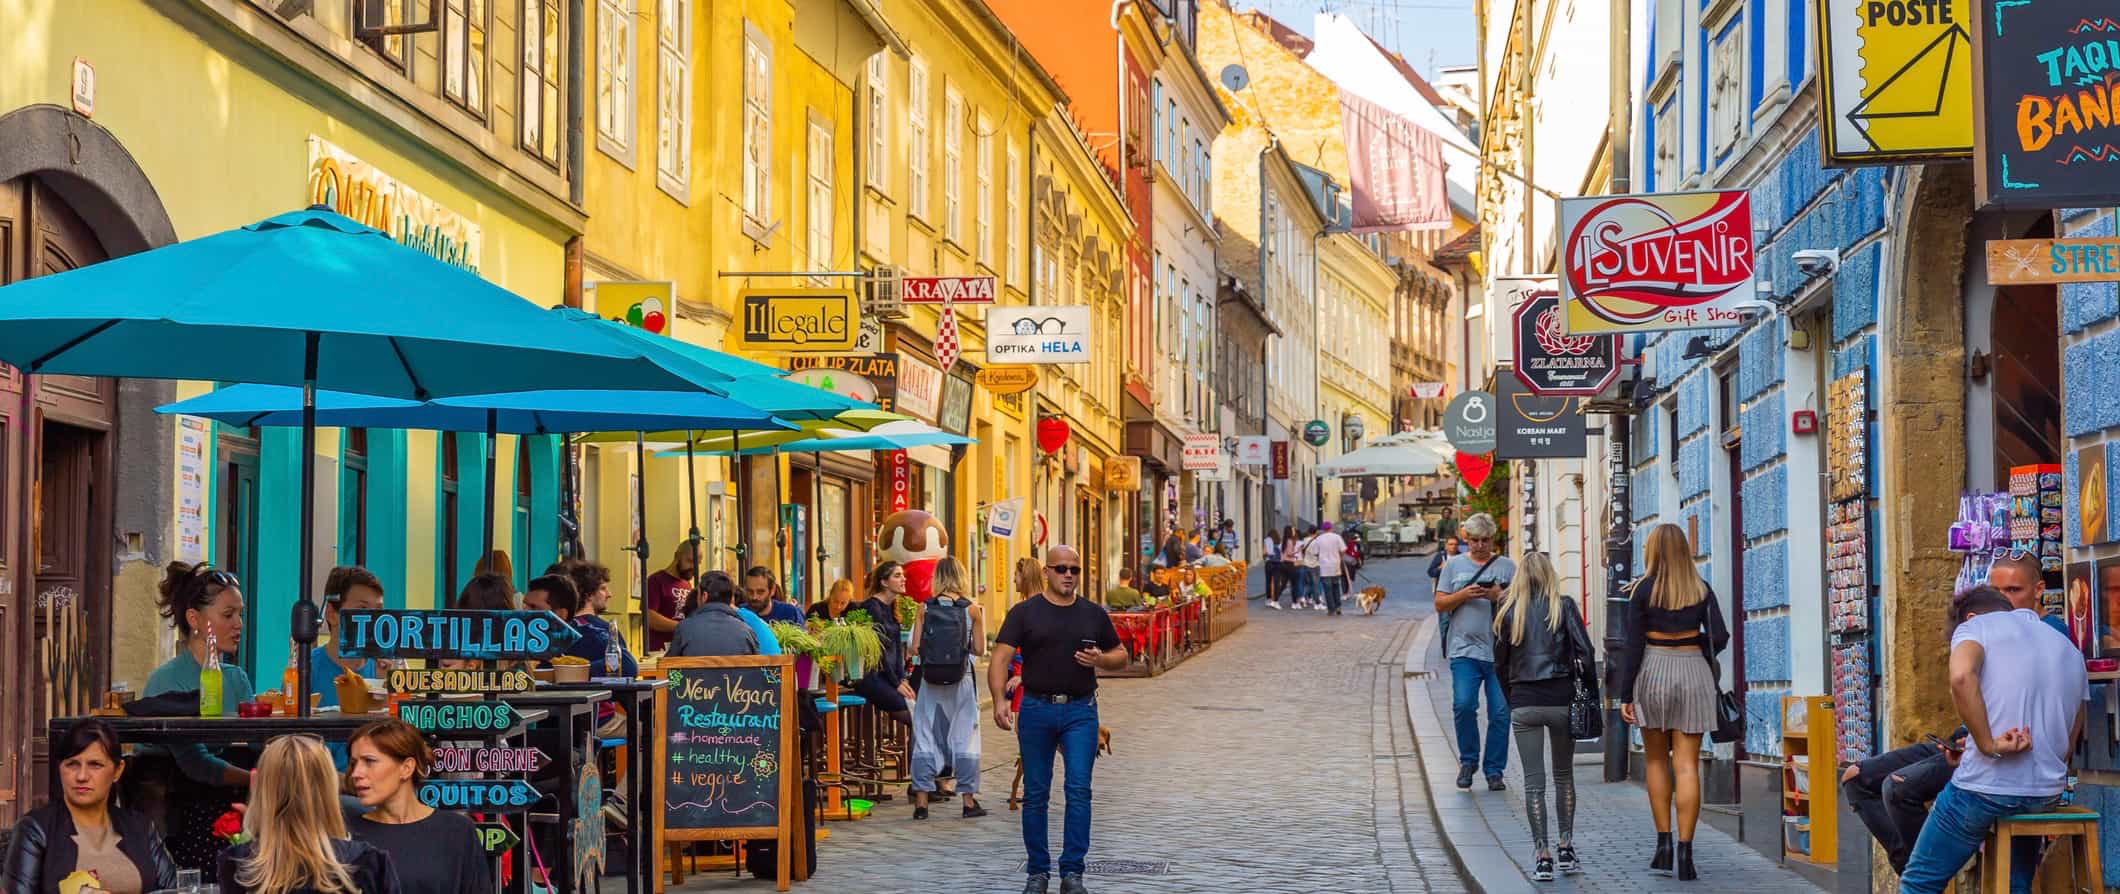 People walking down a narrow street in the Old Town of Zagreb, Croatia